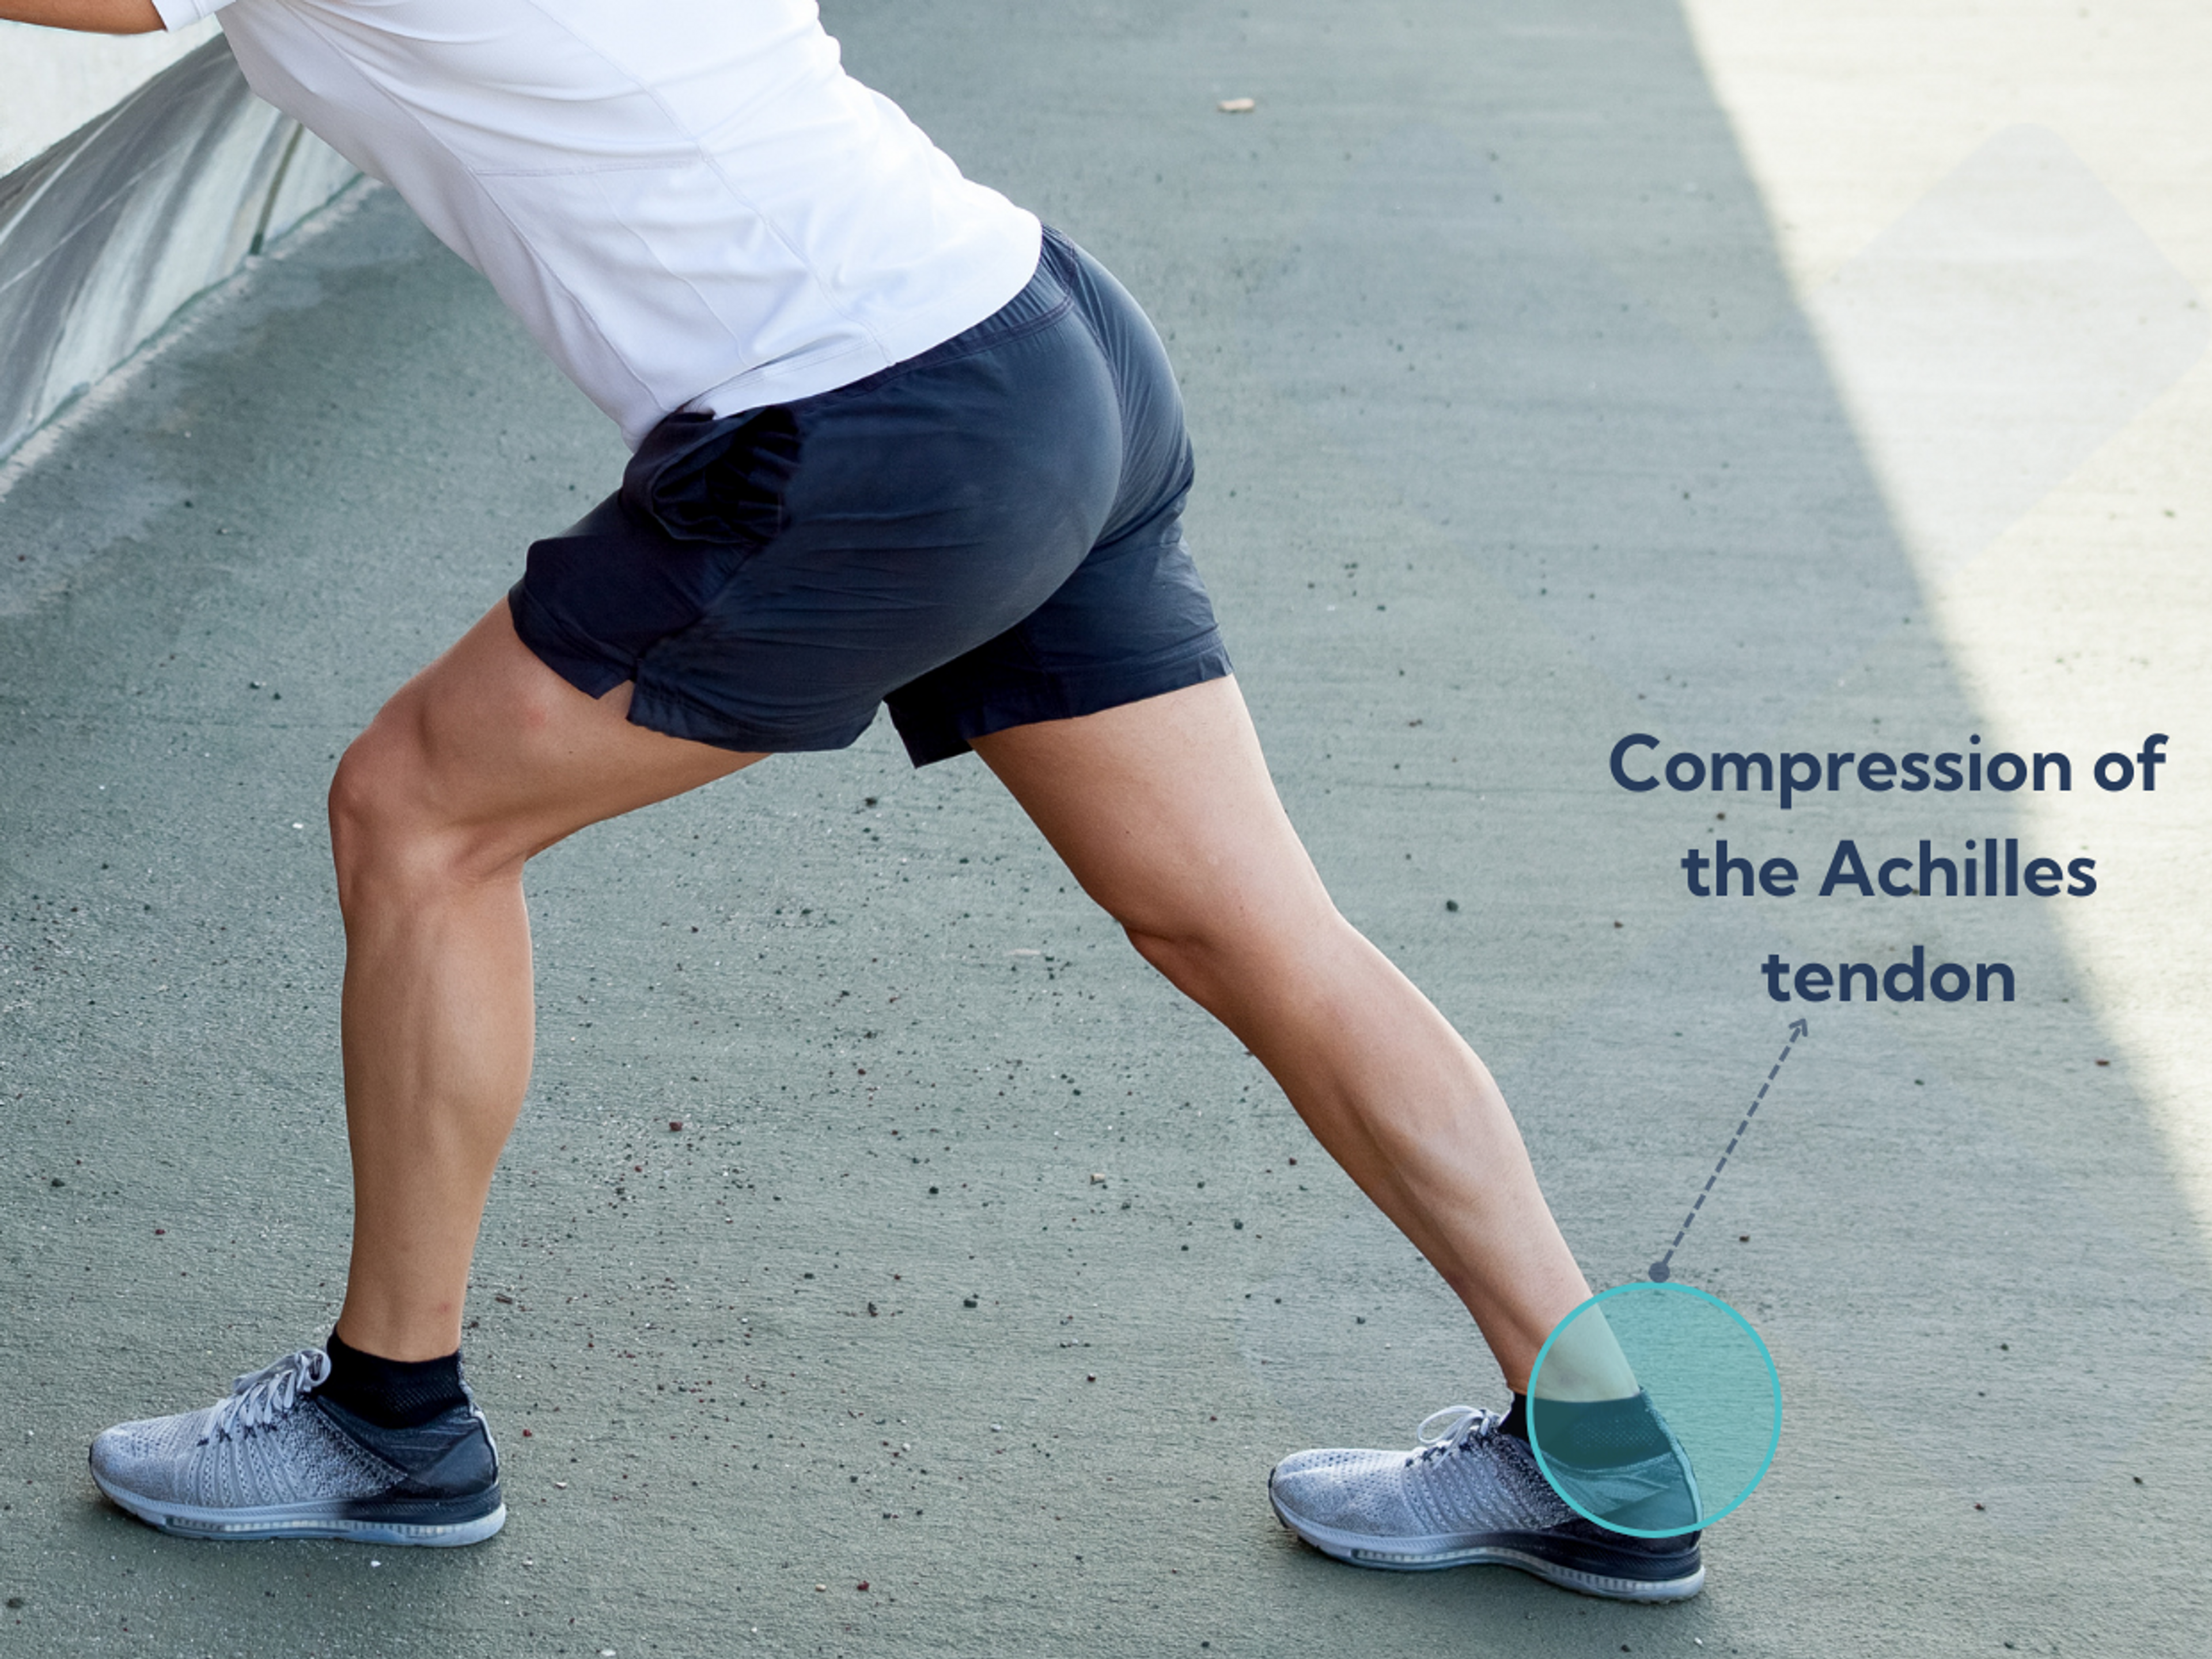 Excessive calf stretching can cause Achilles tendonitis.